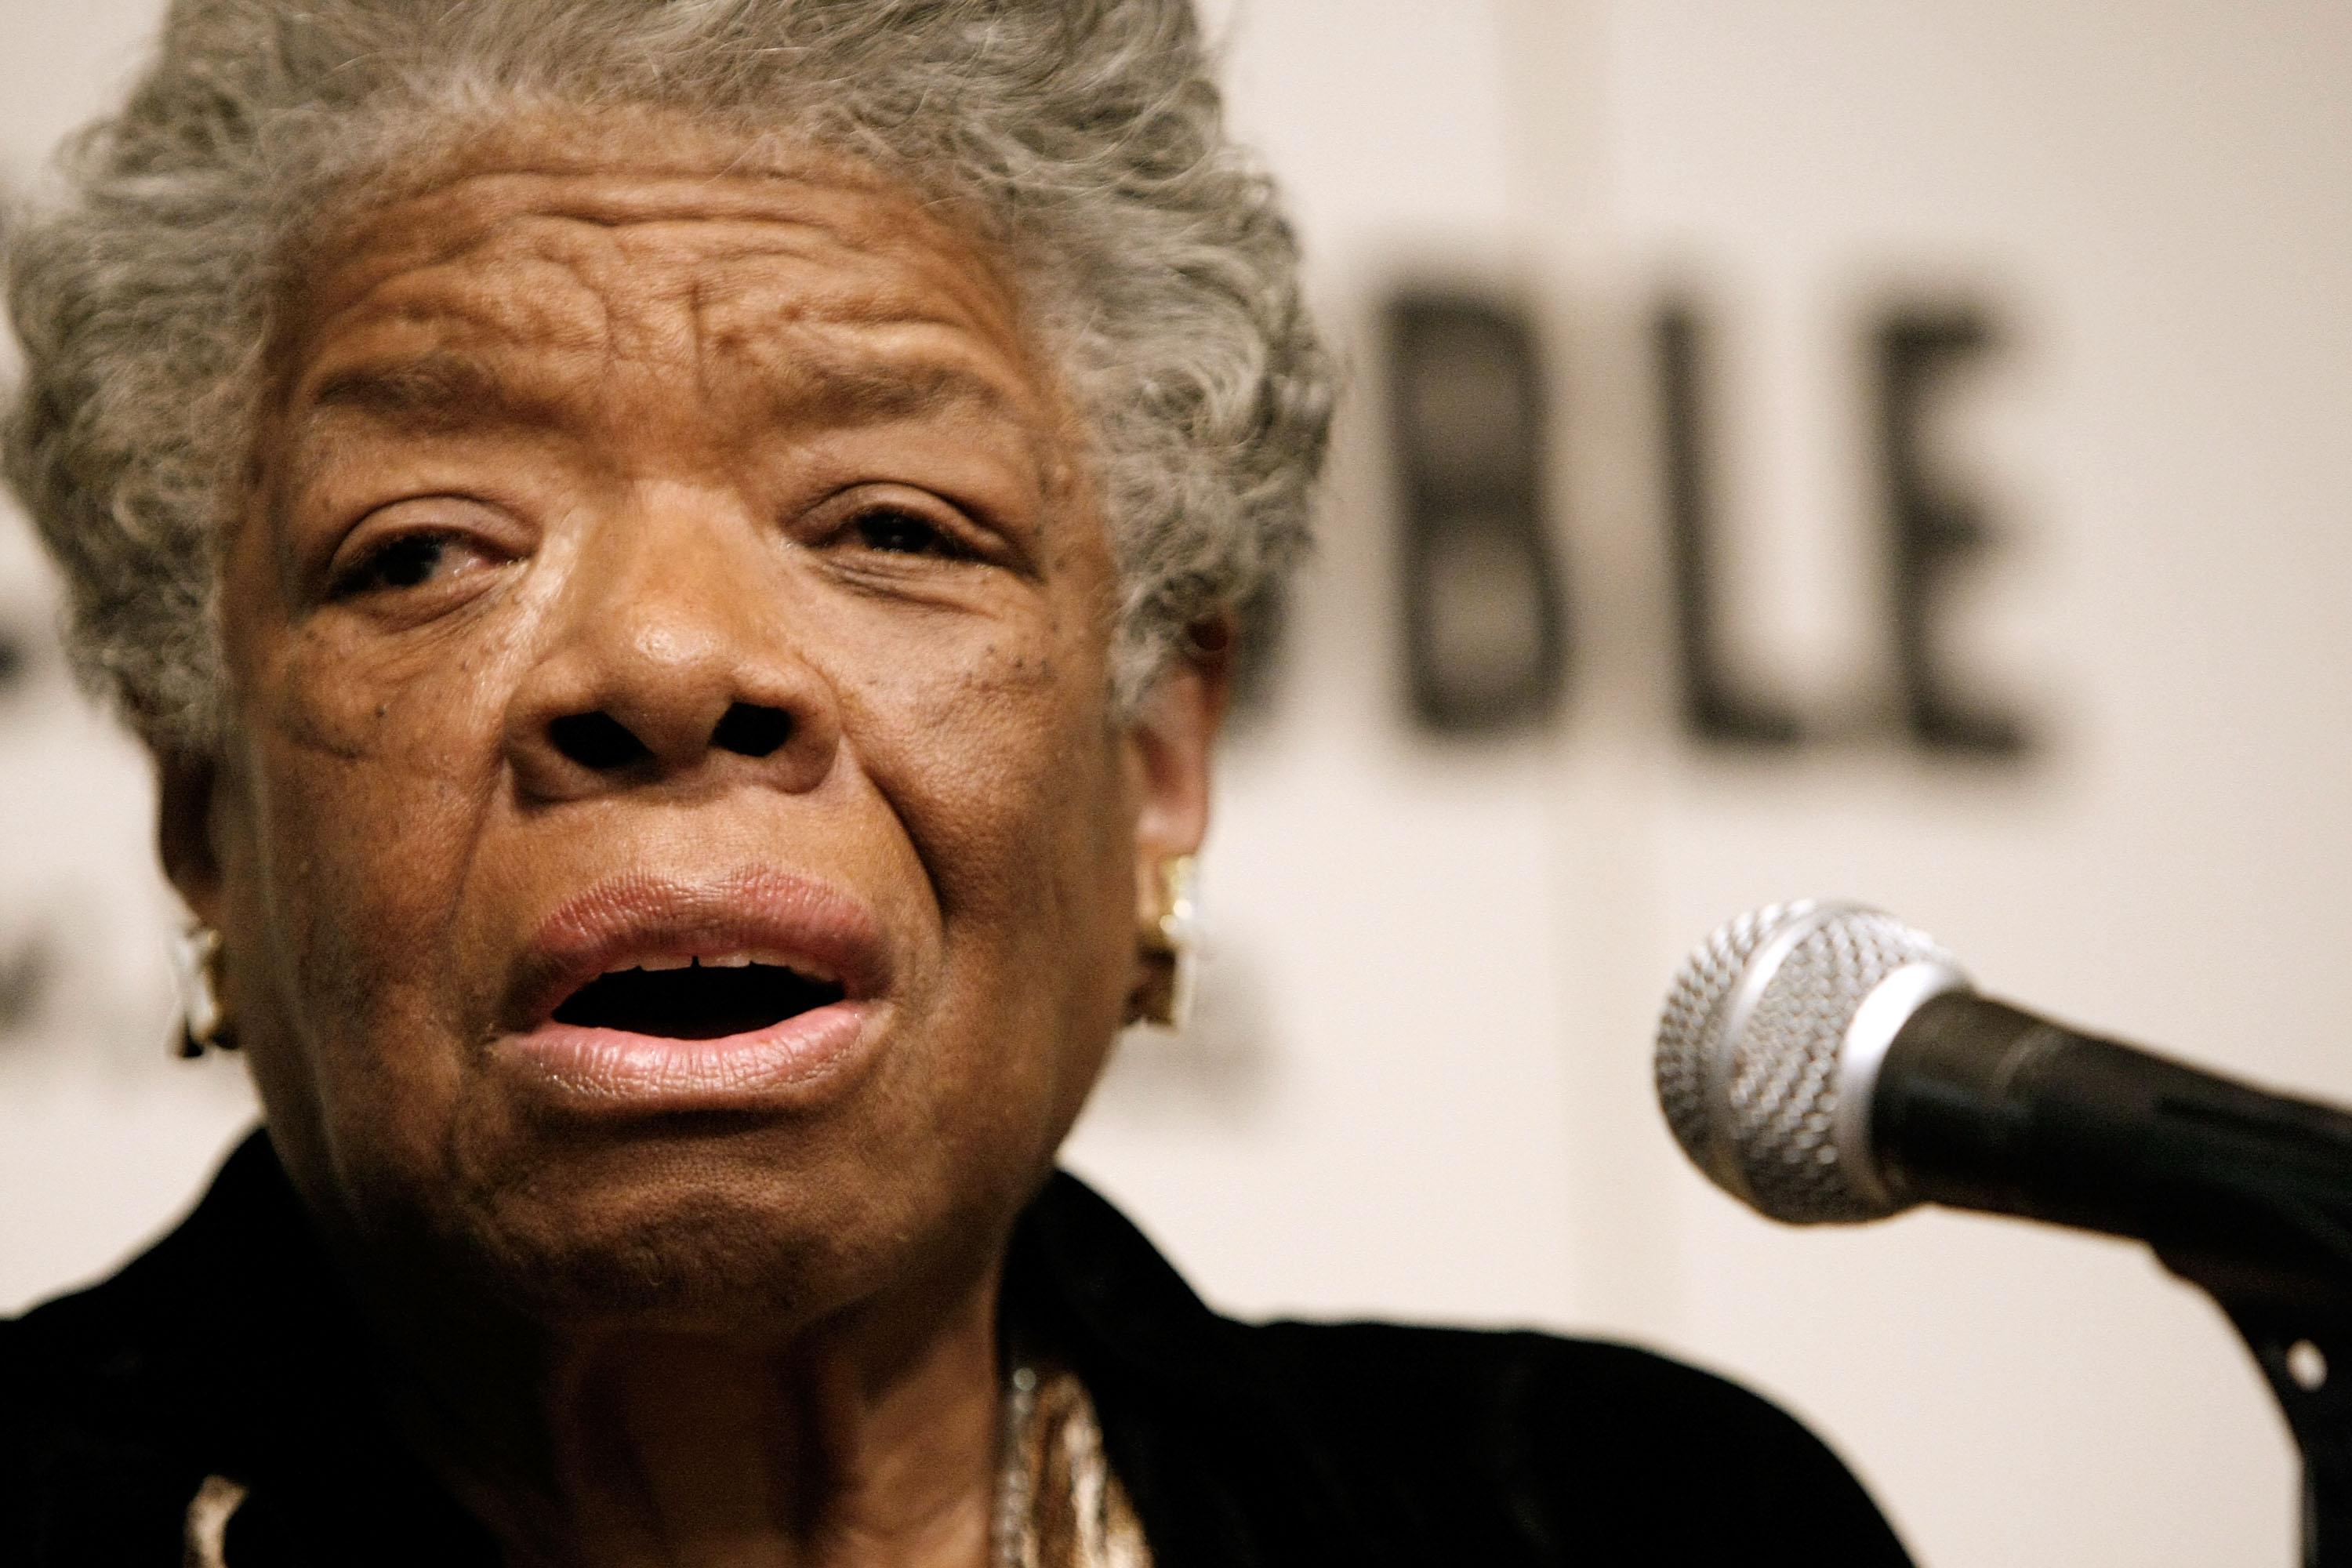 Maya Angelou Signs Copies of 'Maya Angelou: Letter to My Daughter' - October 30, 2008